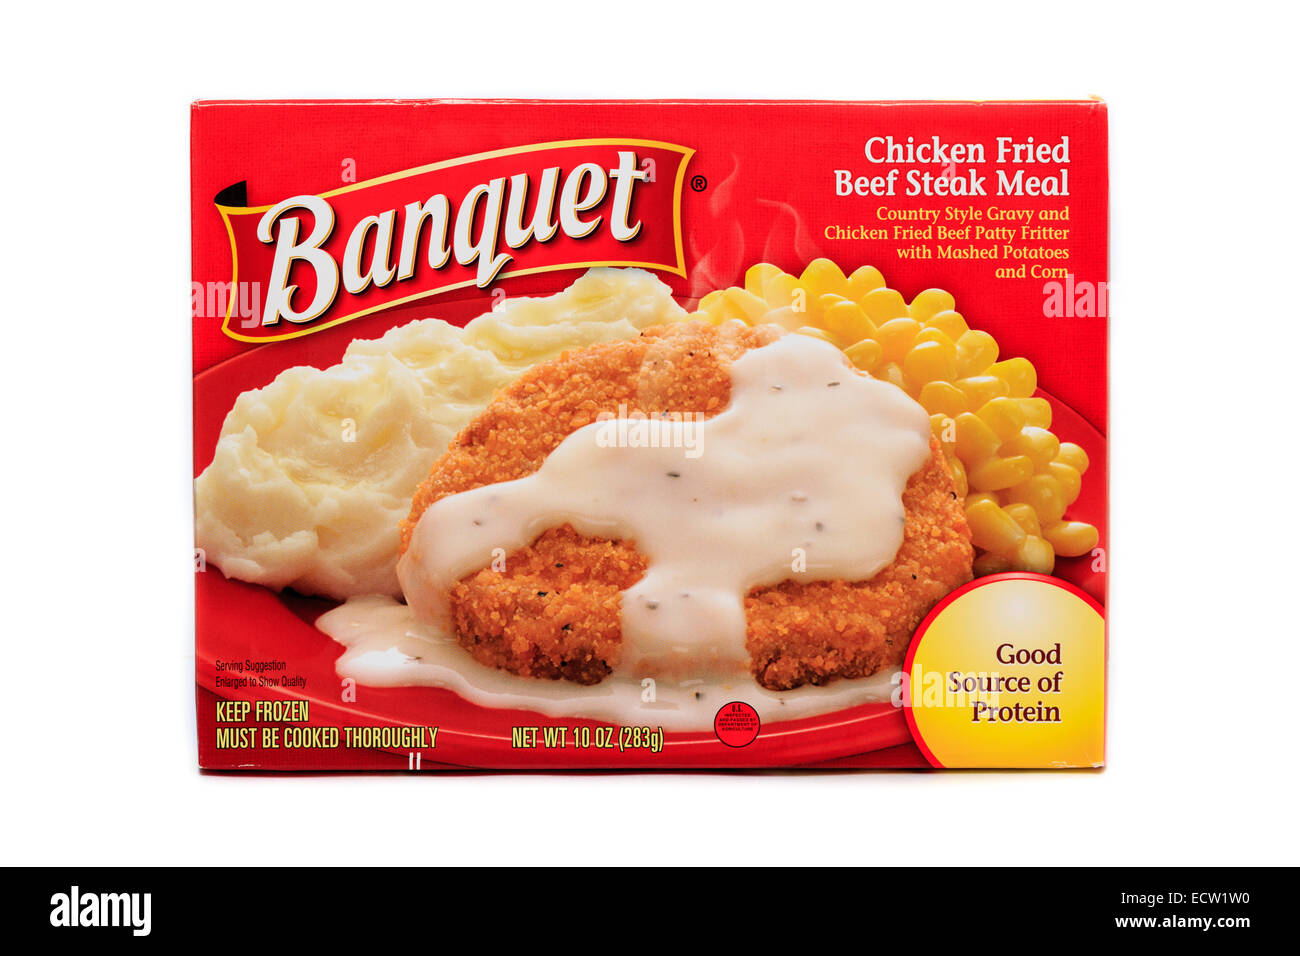 Banquet Chicken Fried Beef Steak Ready Meal Stock Photo